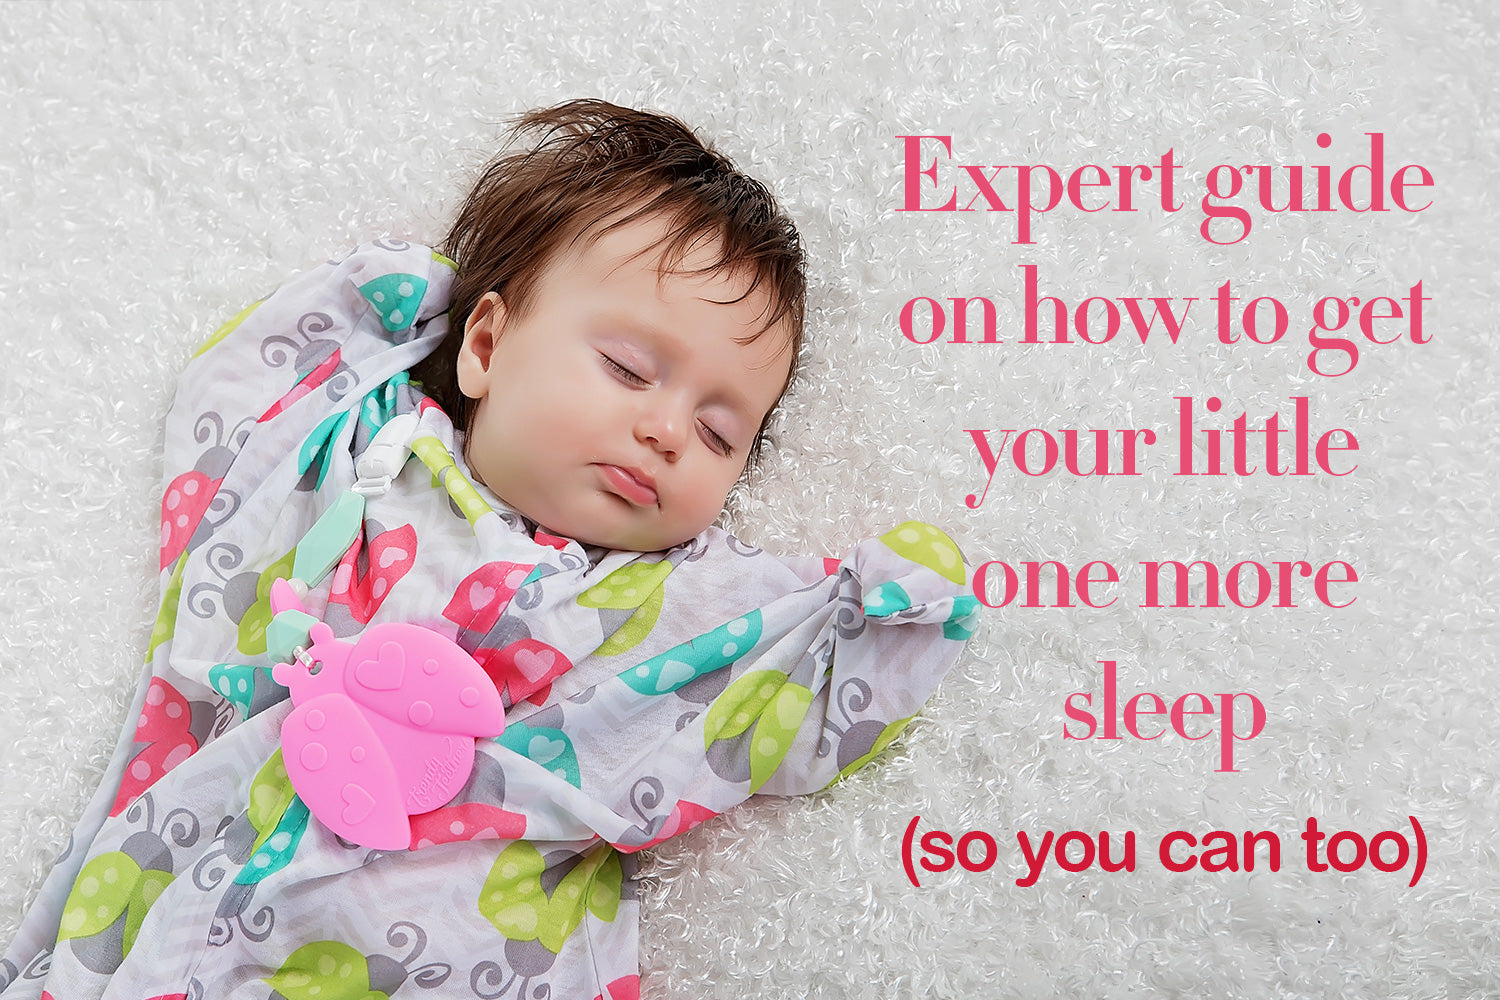 How to get your little one “moore” sleep!